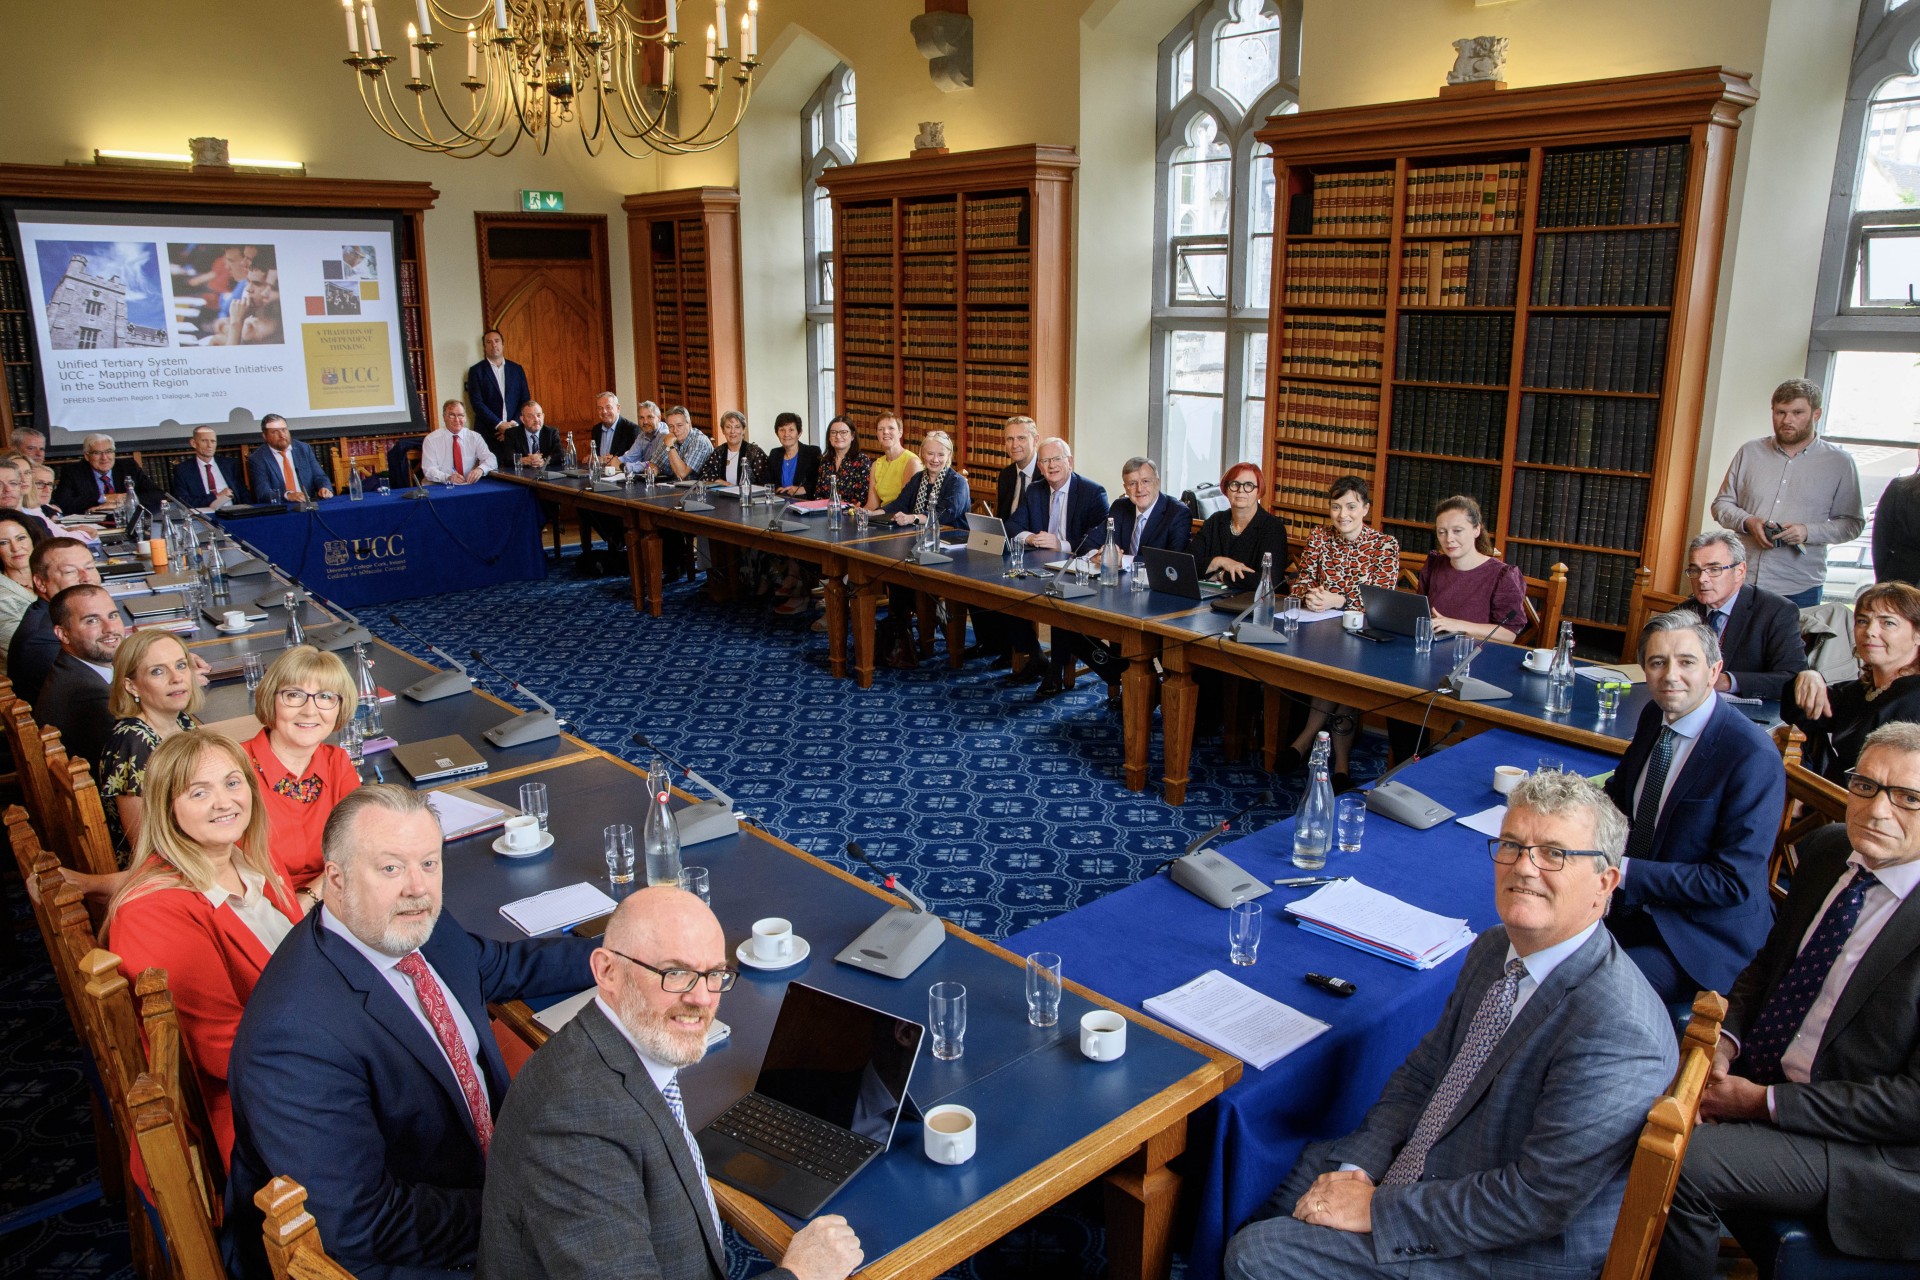 UCC hosts regional forum with educational and research leaders